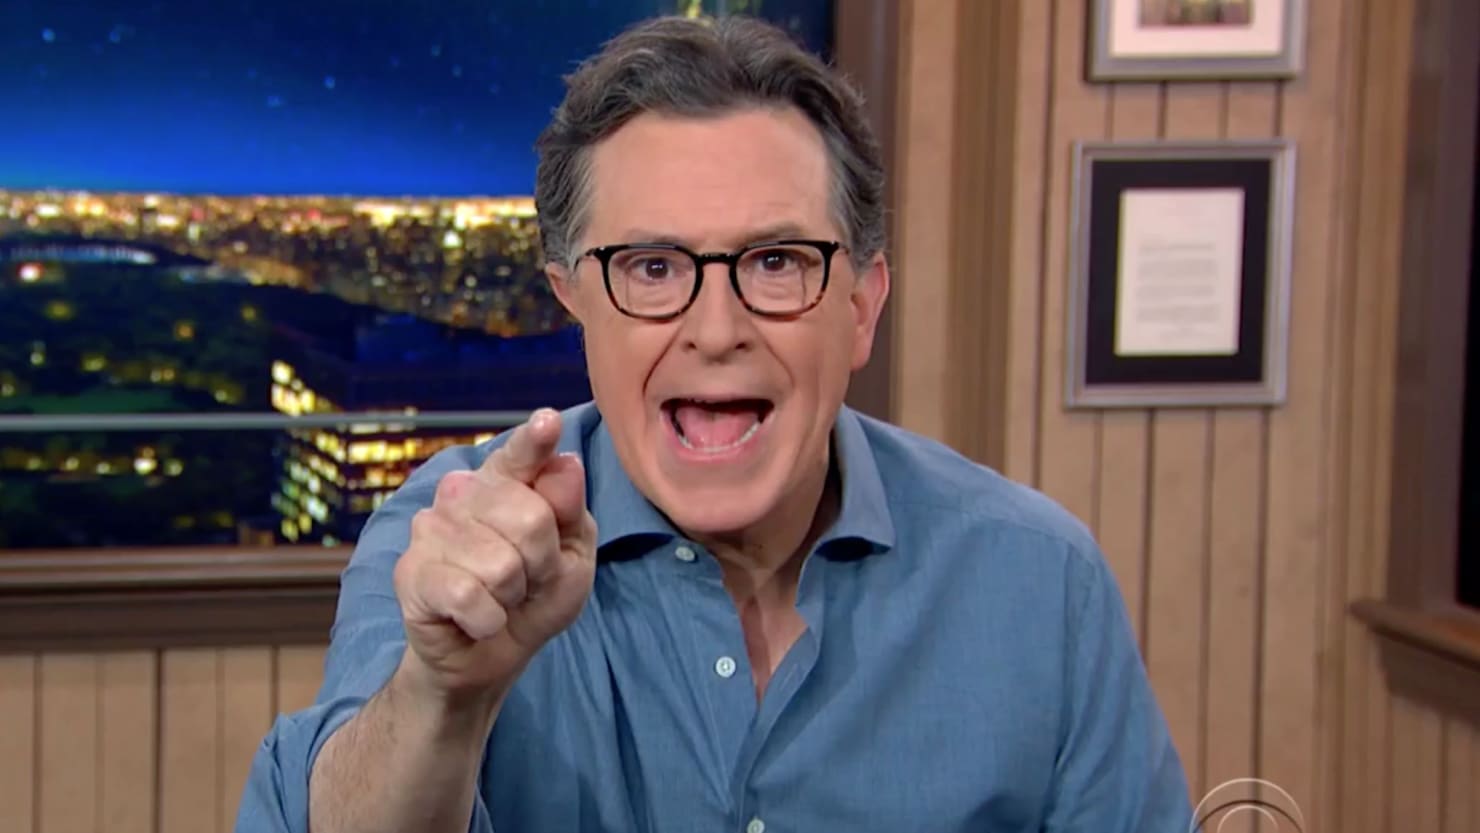 Stephen Colbert rages at Republicans who call for “unity” after the Capitol riot